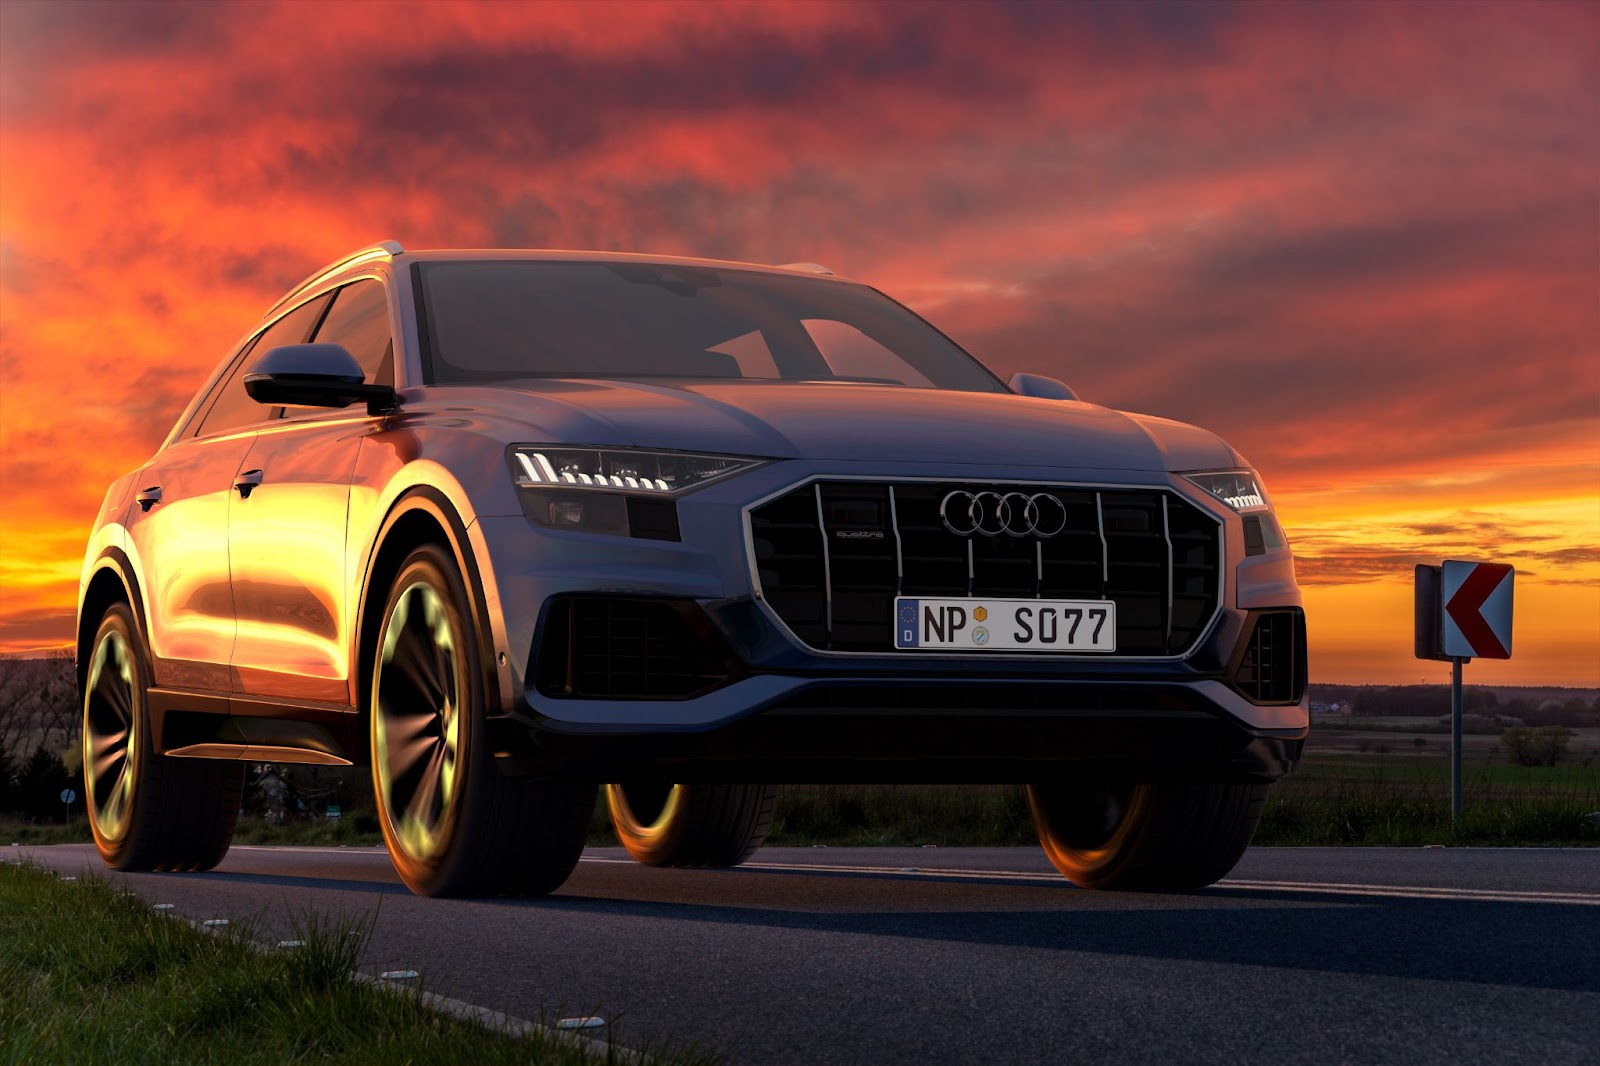 An Audi SUV at sunset on a road